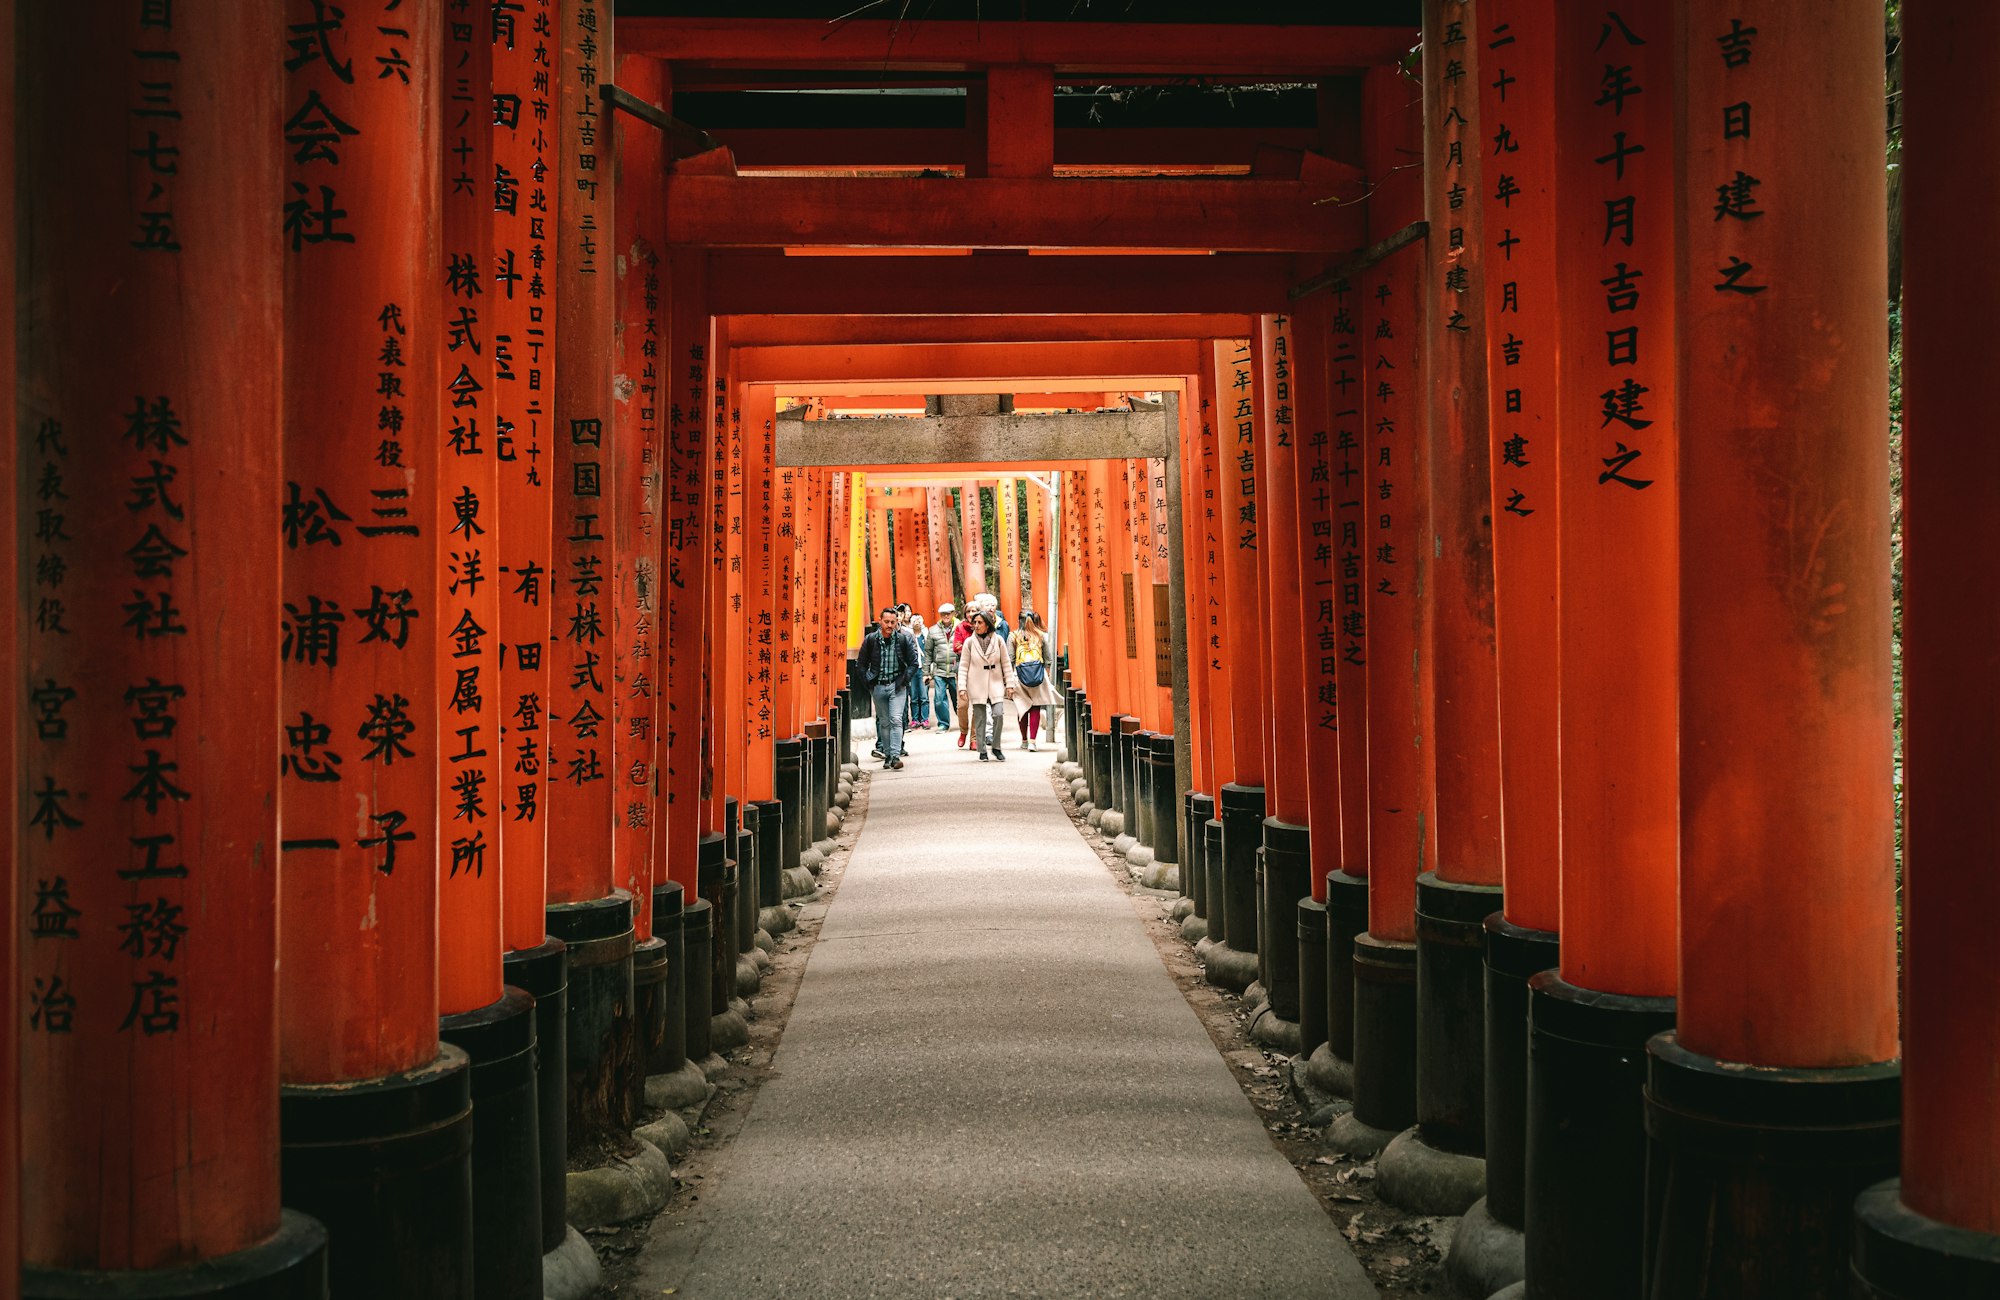 Follow me on instagram @dennisags for more!!
People walking passing thousands of Torii Gate Fushimi Inari Shrine, Kyoto, Japan